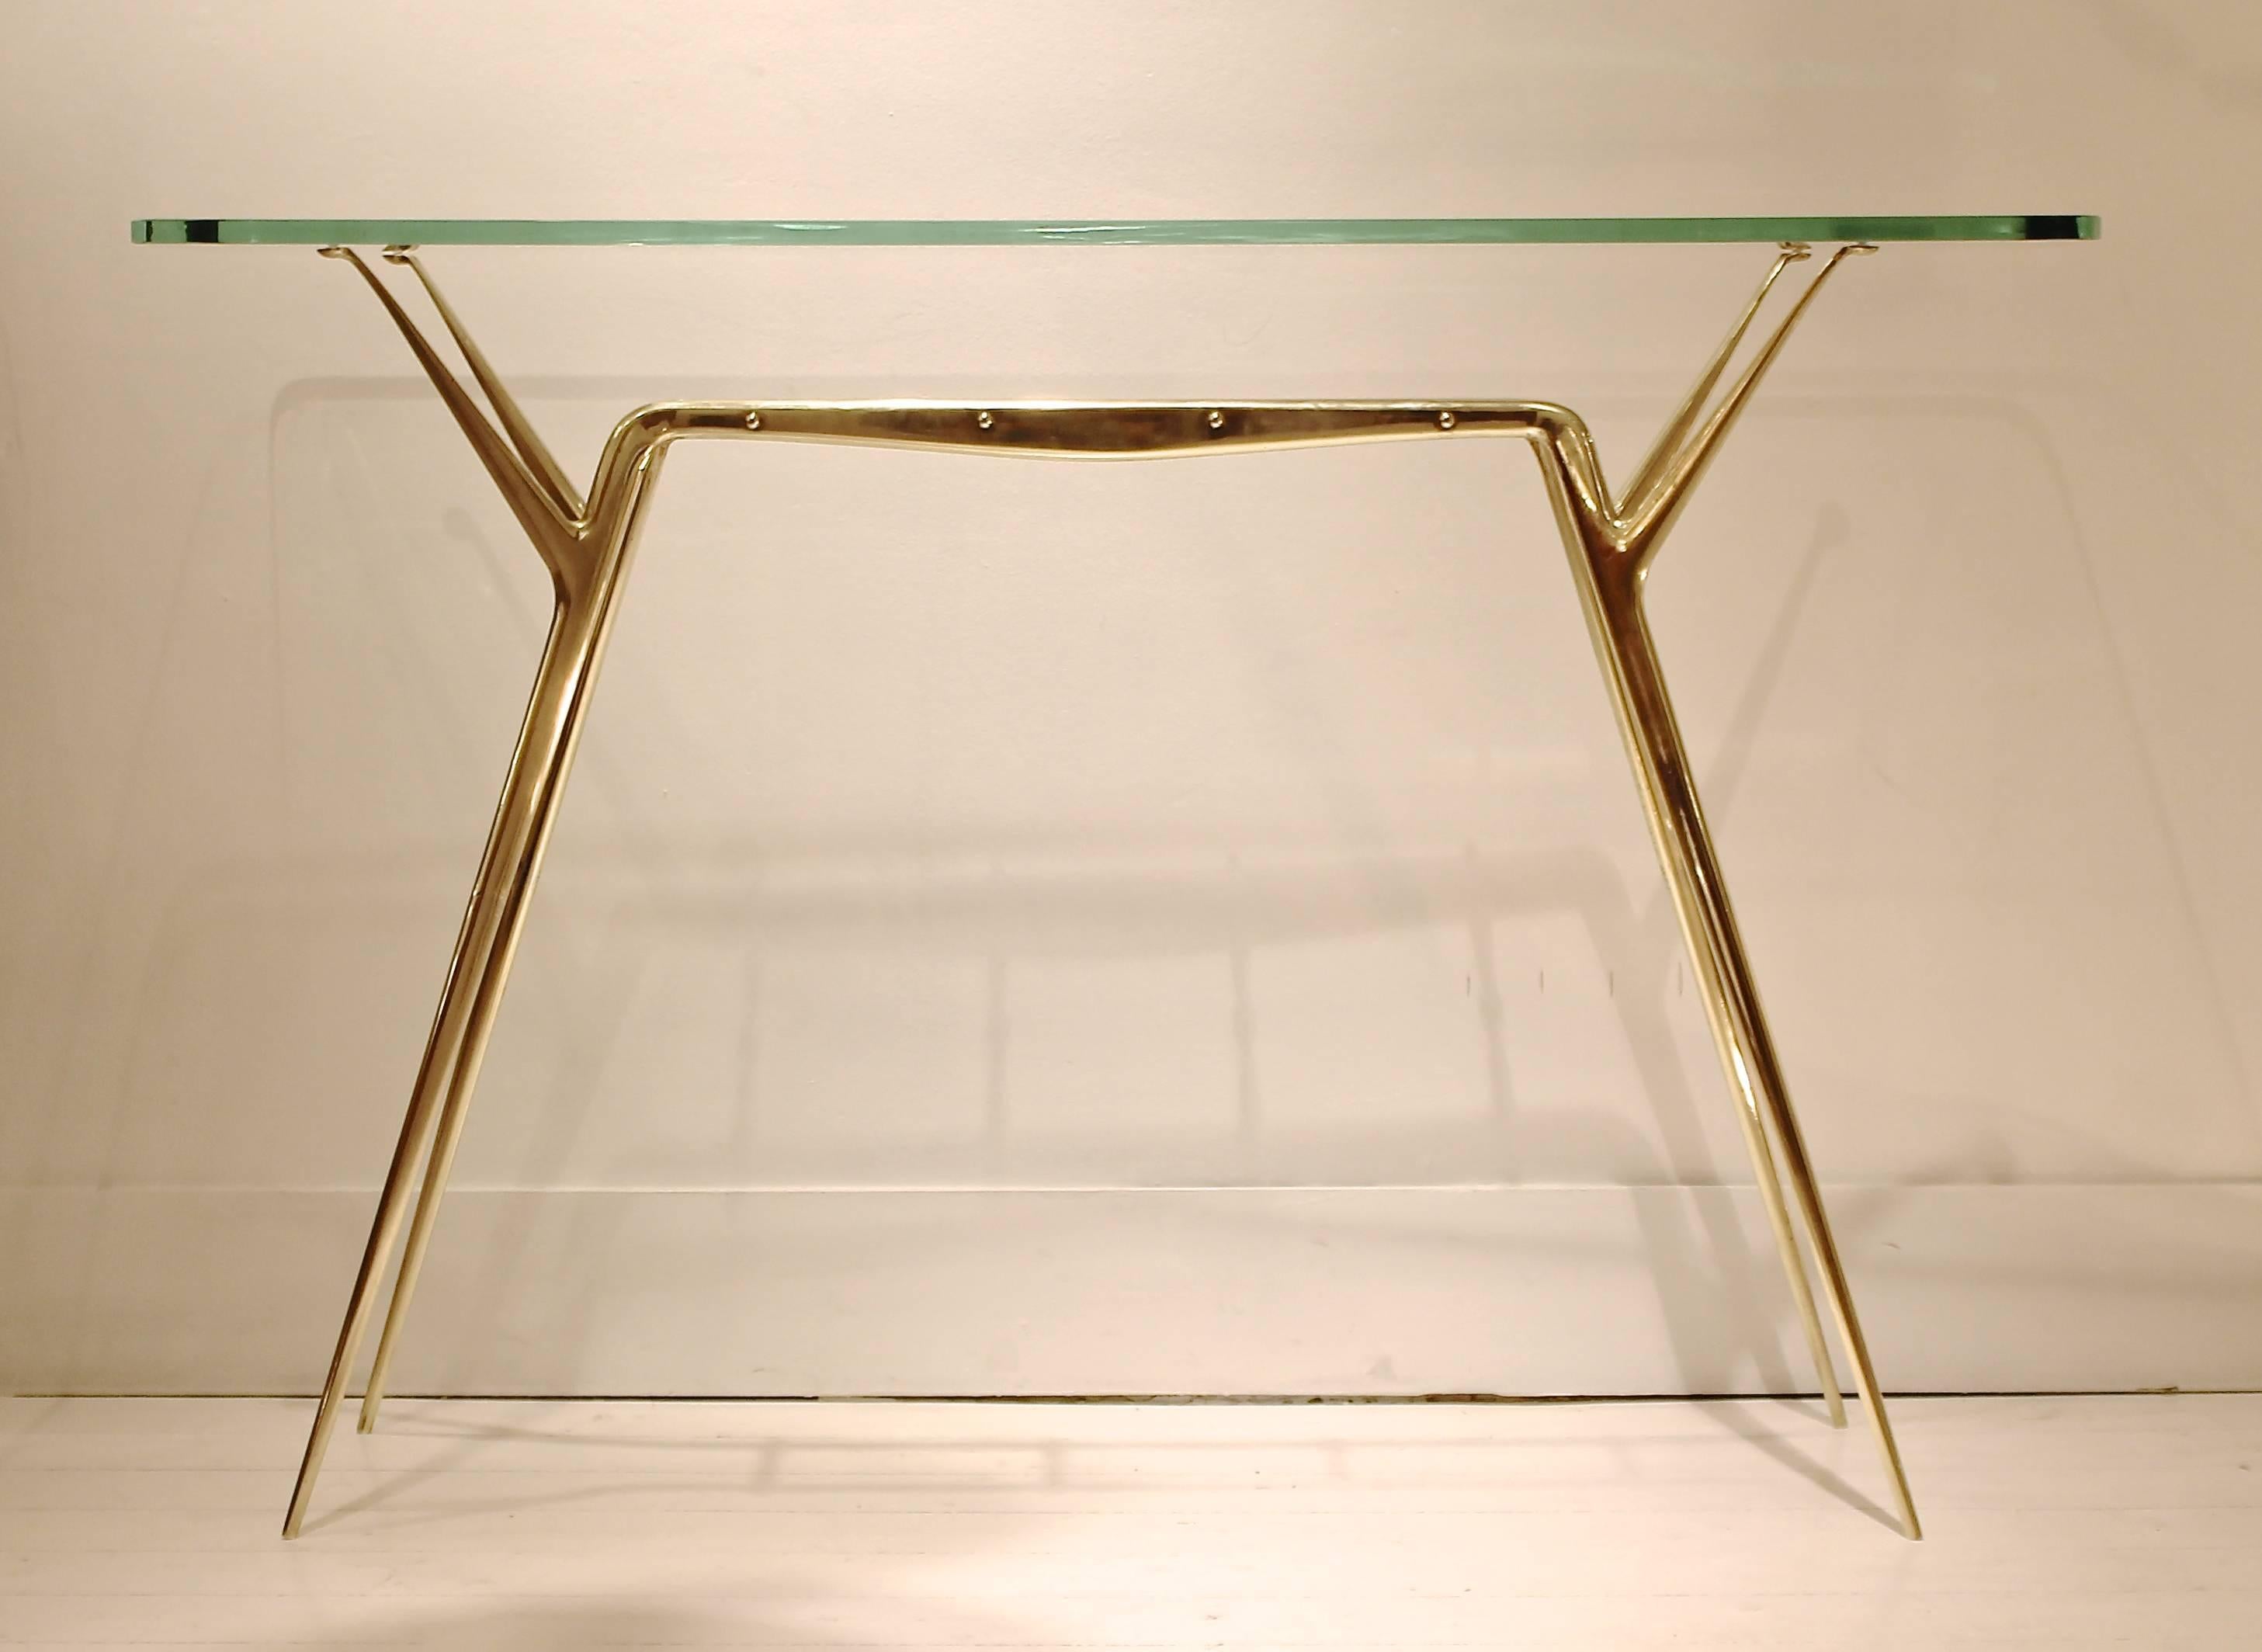 Born in Naples in 1929, Italian architect-designer Cesare Lacca created modernist furniture and metalwork throughout the 1950s. Though details of his personal life and professional training remain lost to history, there are sufficient surviving